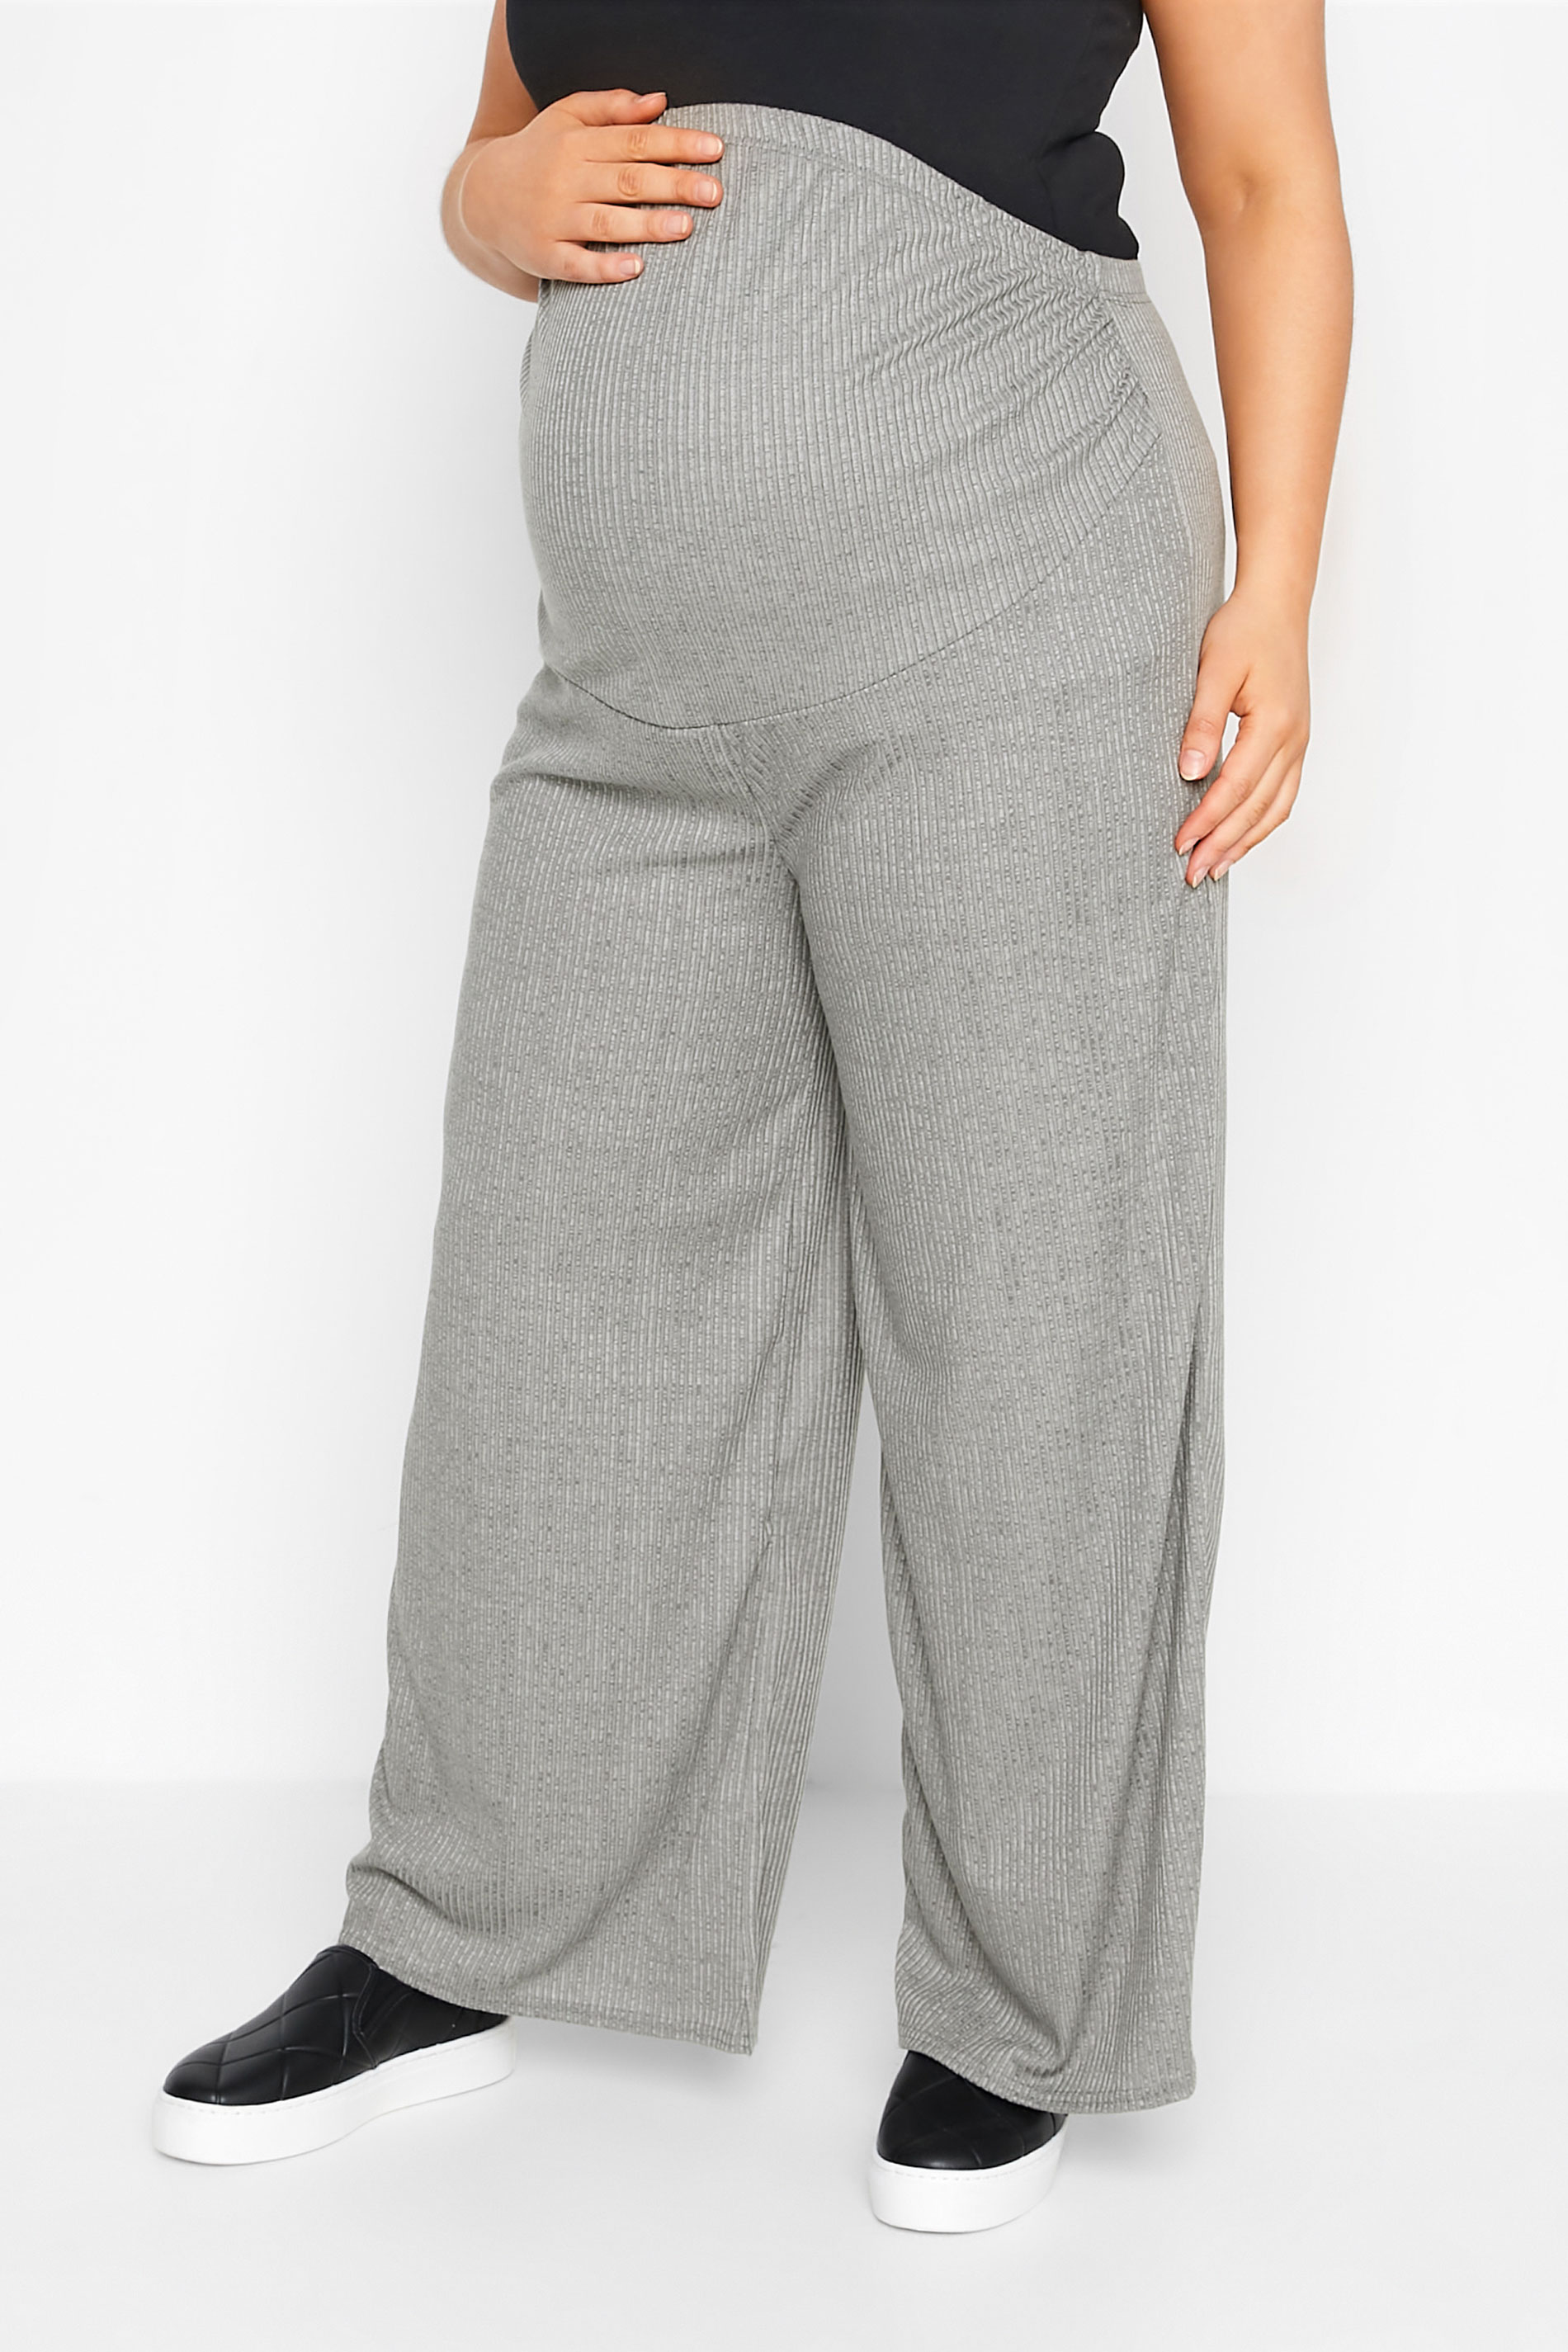 BUMP IT UP MATERNITY Plus Size Grey Ribbed Stretch Wide Leg Trousers | Yours Clothing 1